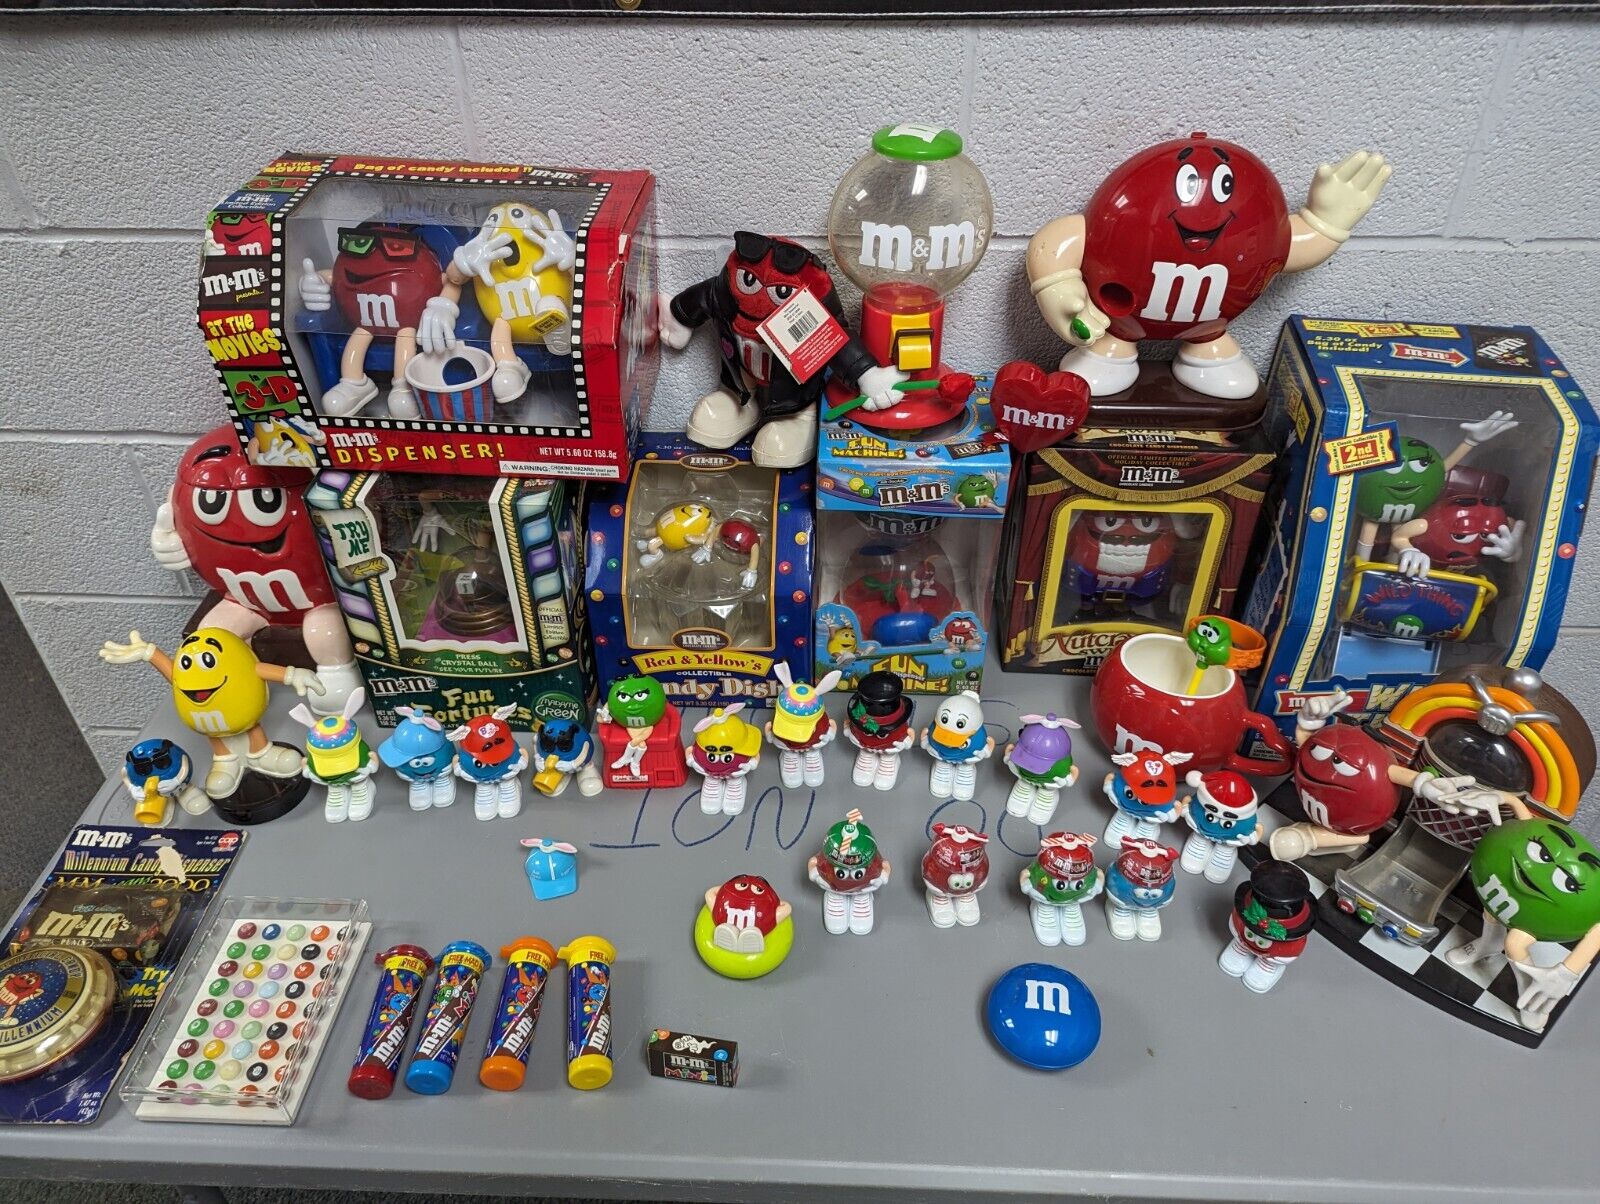 M&M Figurines Collectors Lot. Includes rare 1 of a kind M&M Holidays prototype.